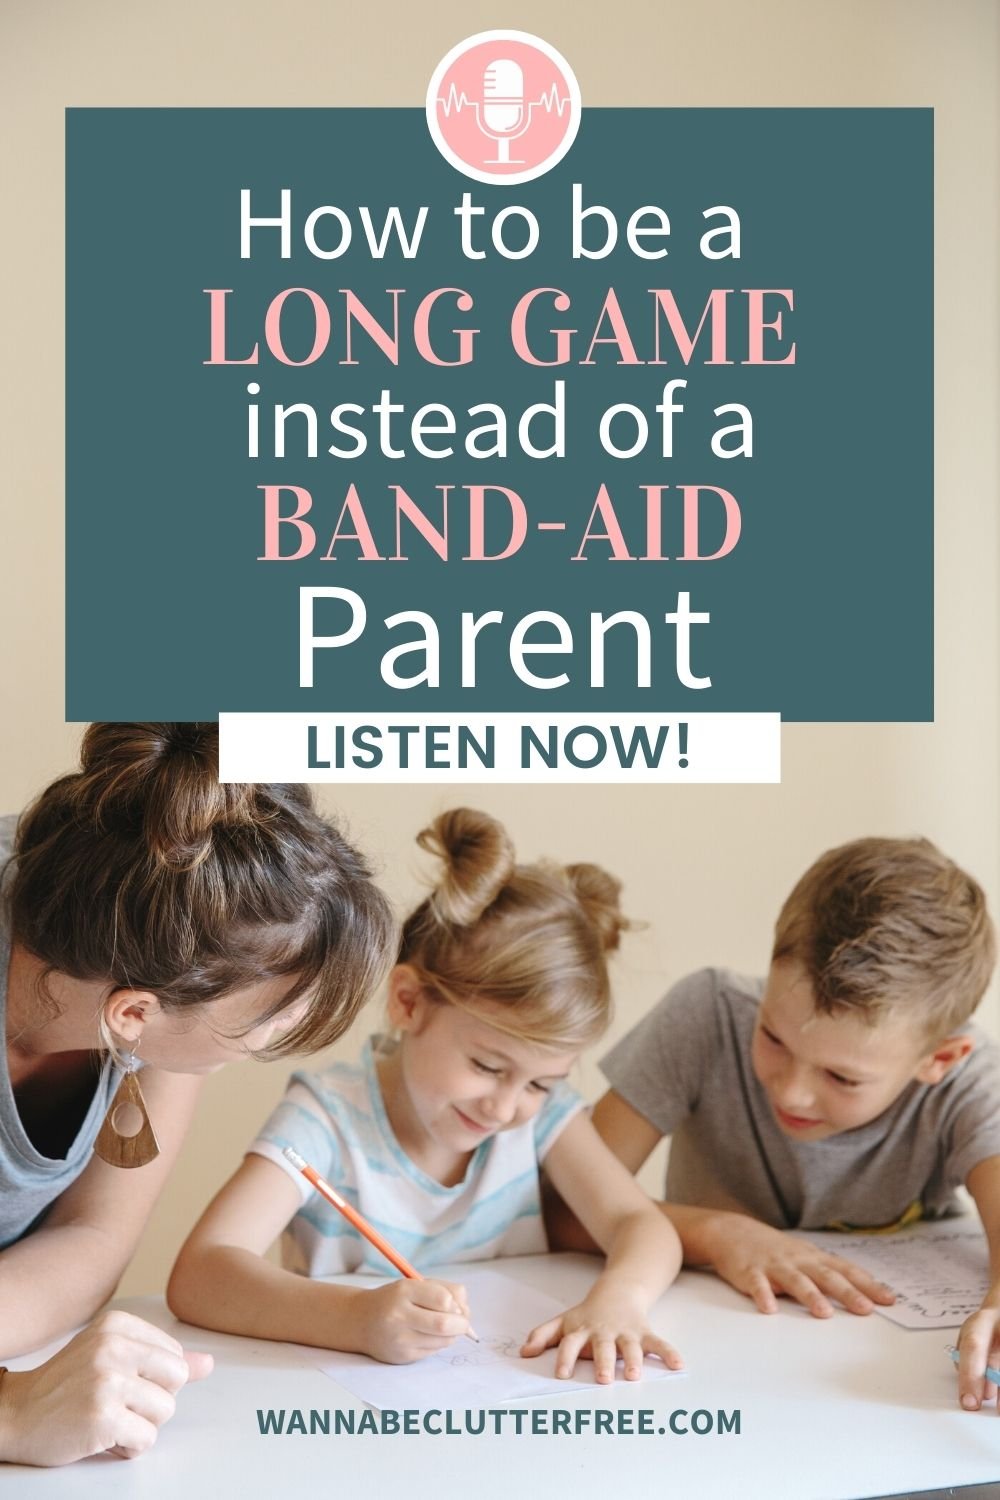 How to be a long-game instead of a band-aid parent